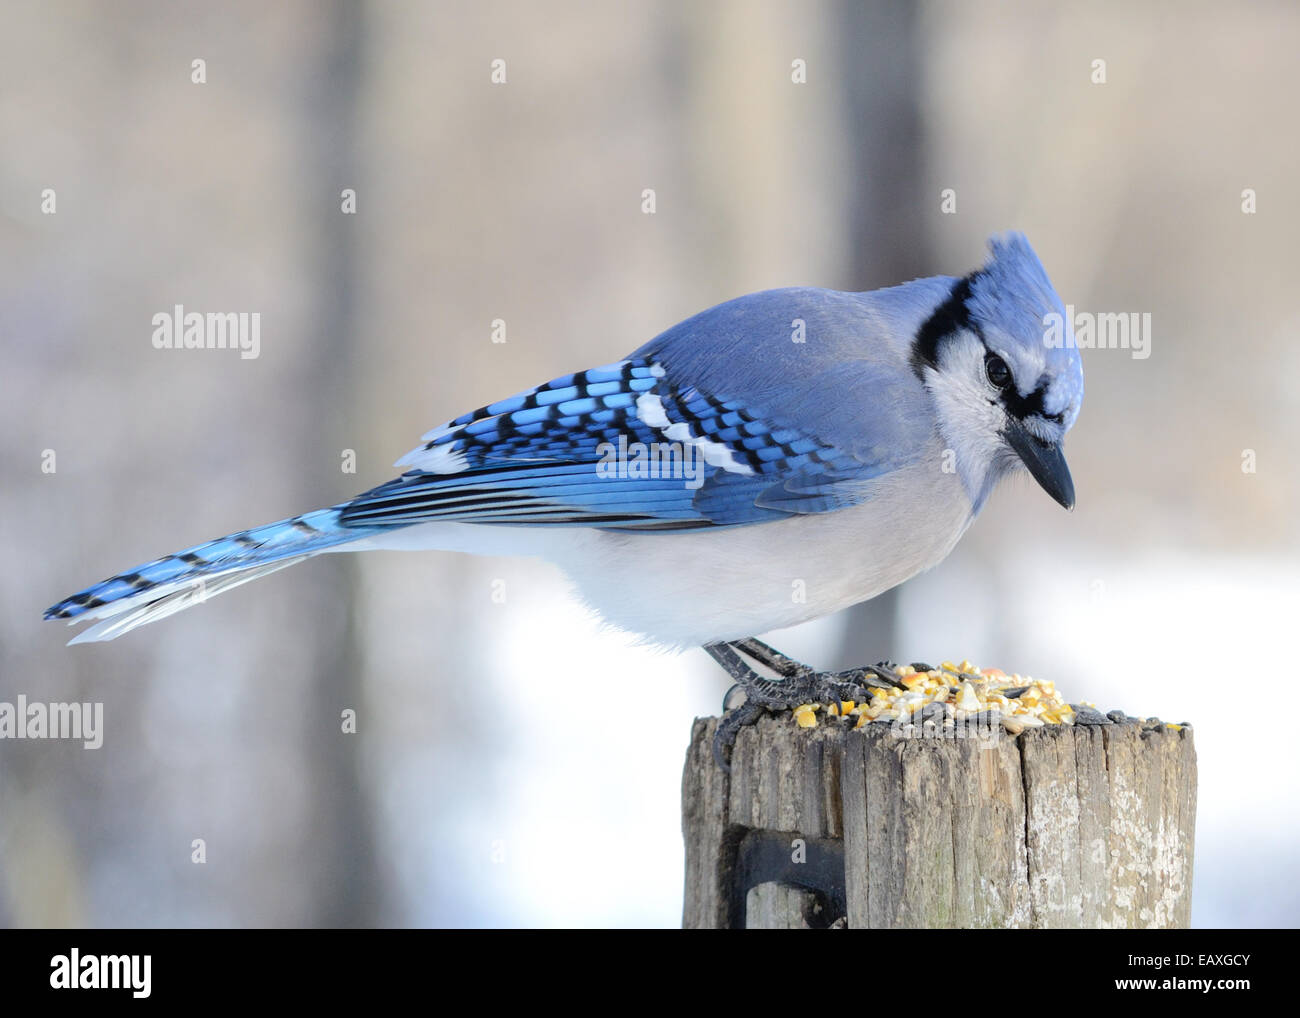 A blue jay perched on a post with bird seed. Stock Photo